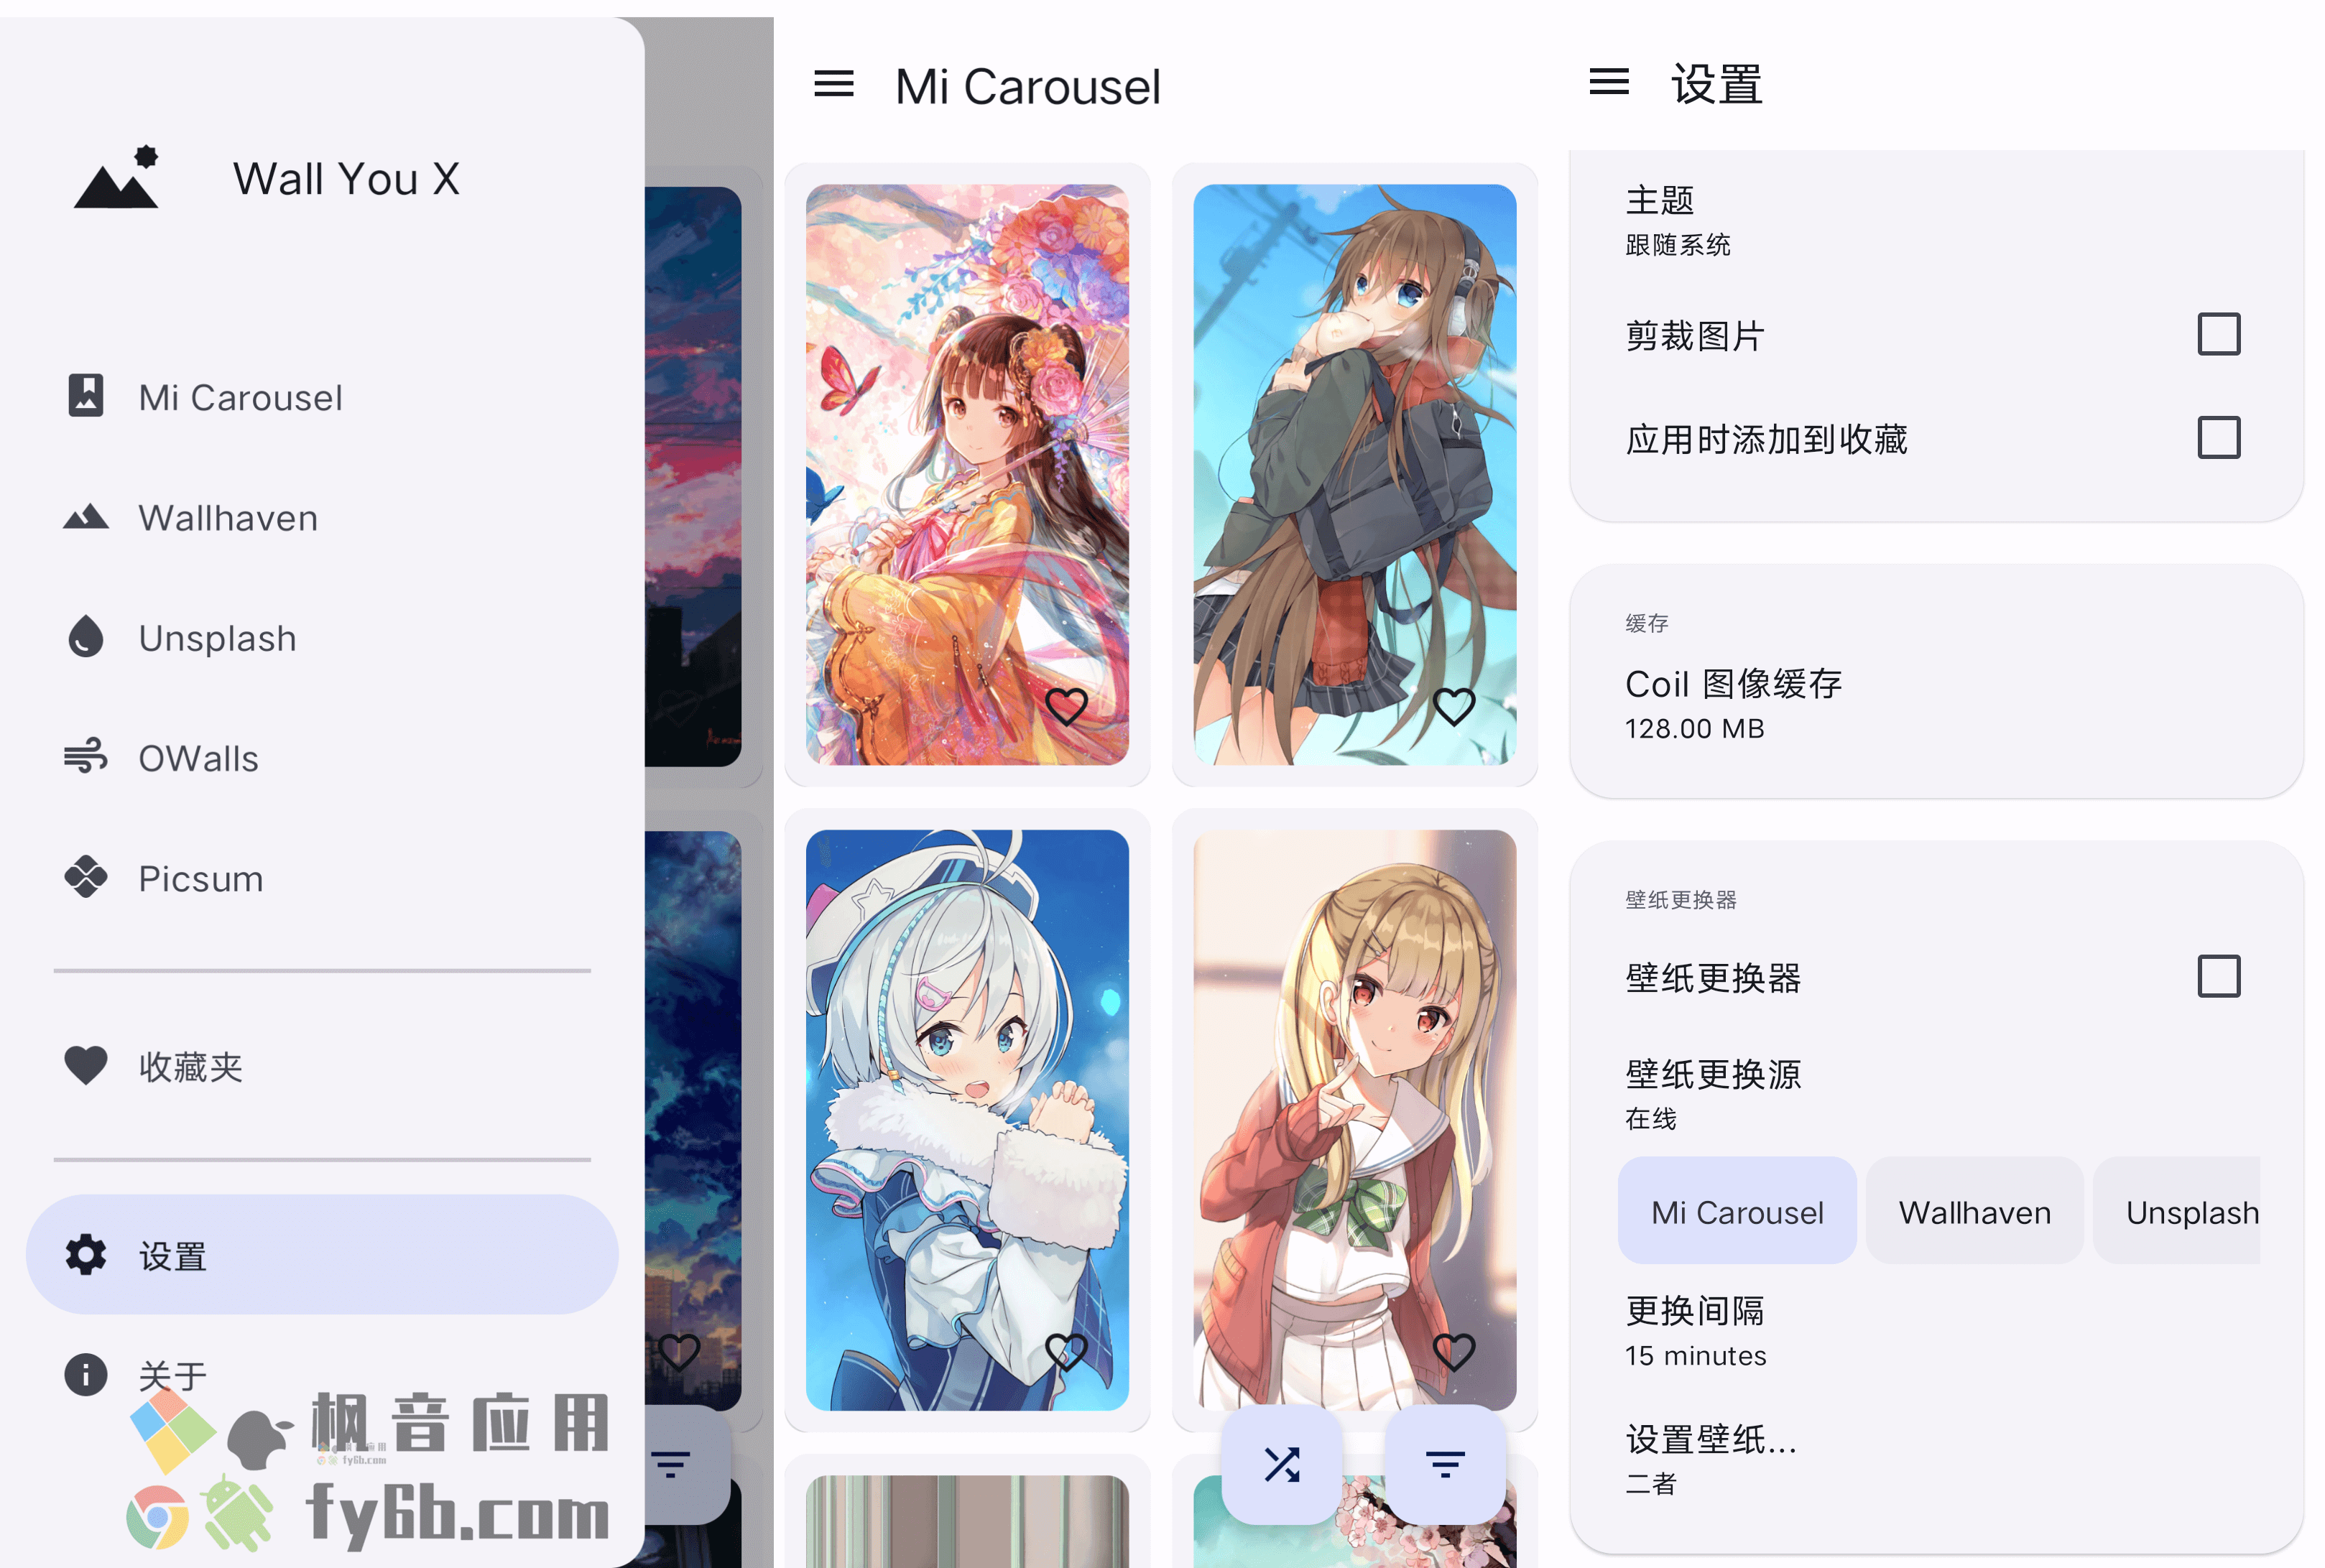 Android Wall You X 壁纸_v3.3